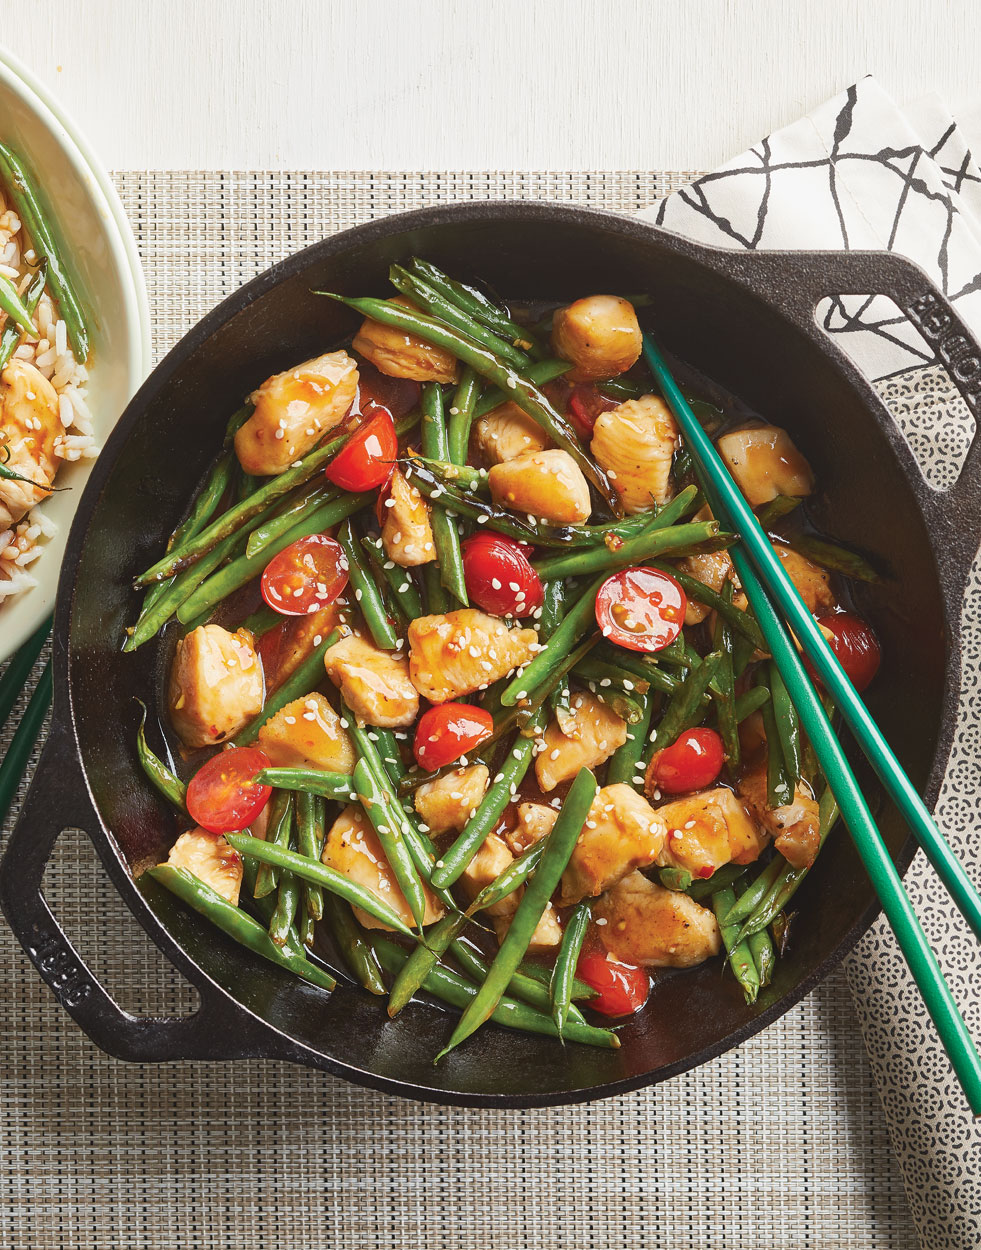 Chicken Stir-Fry with green beans & tomatoes